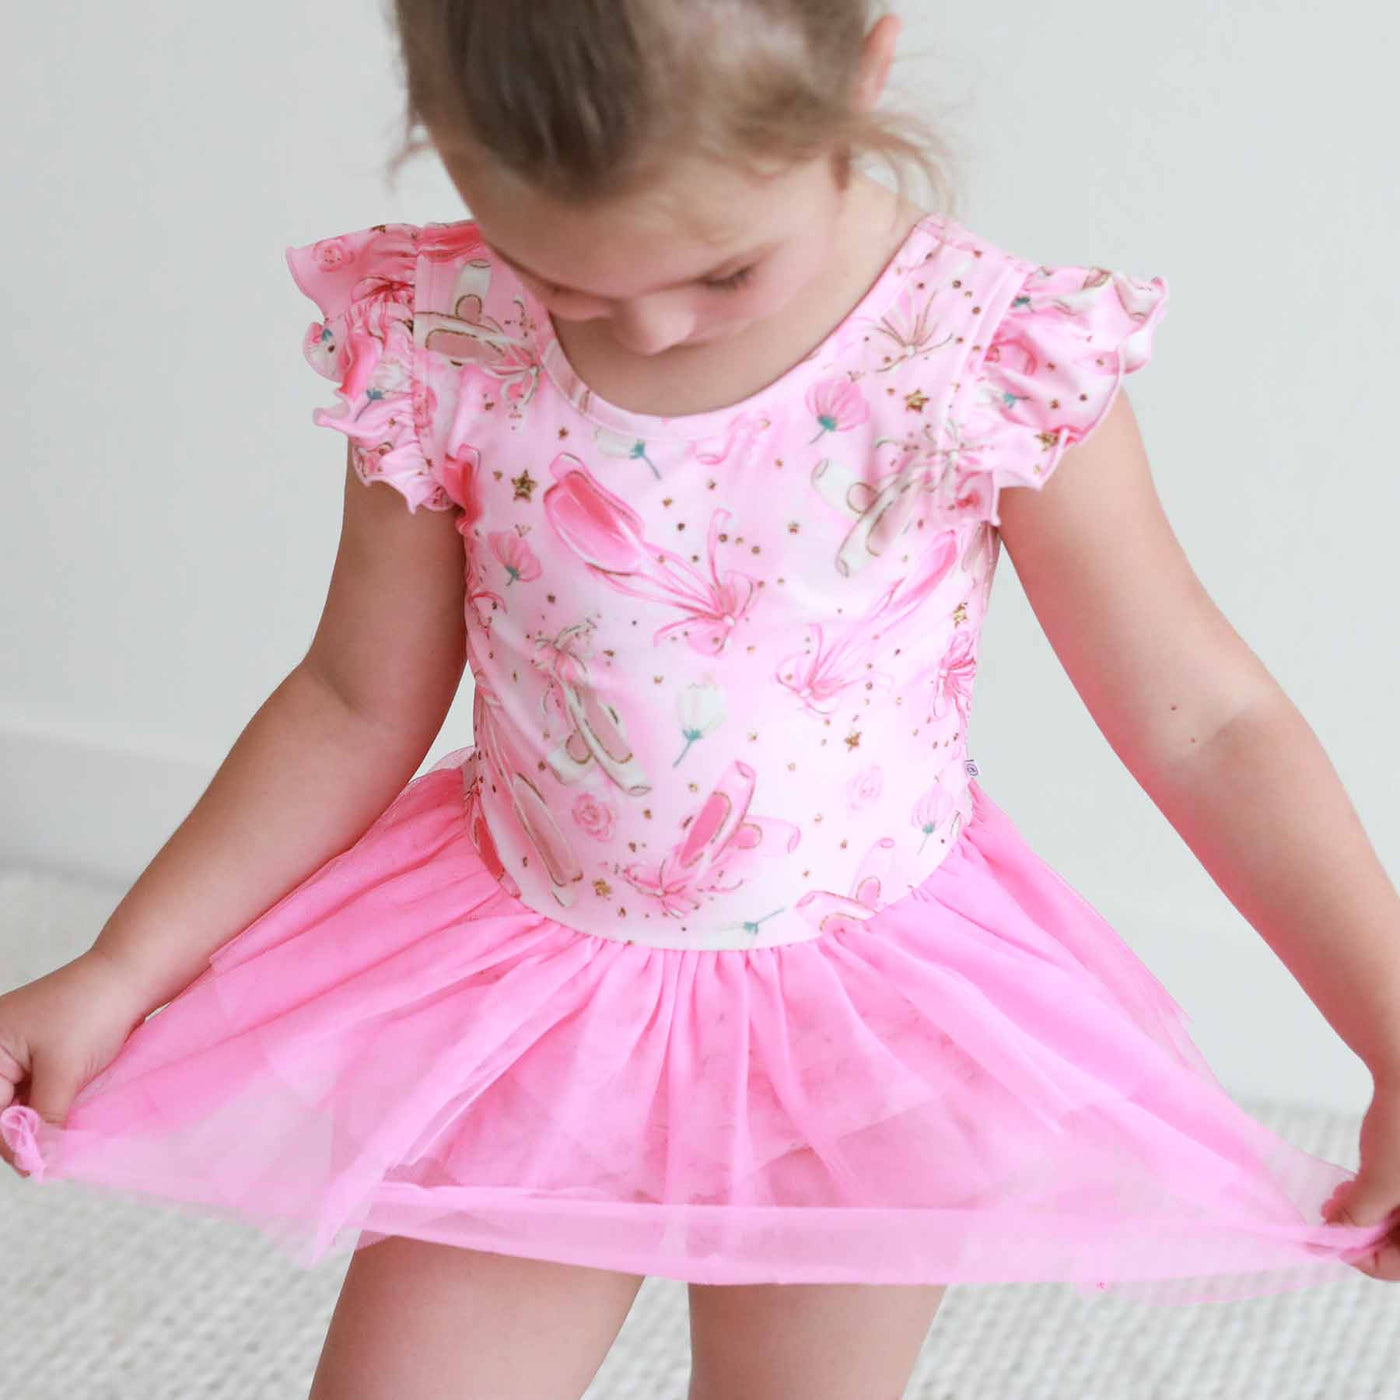 ballet shoes leotard for girls with bright pink skirt 